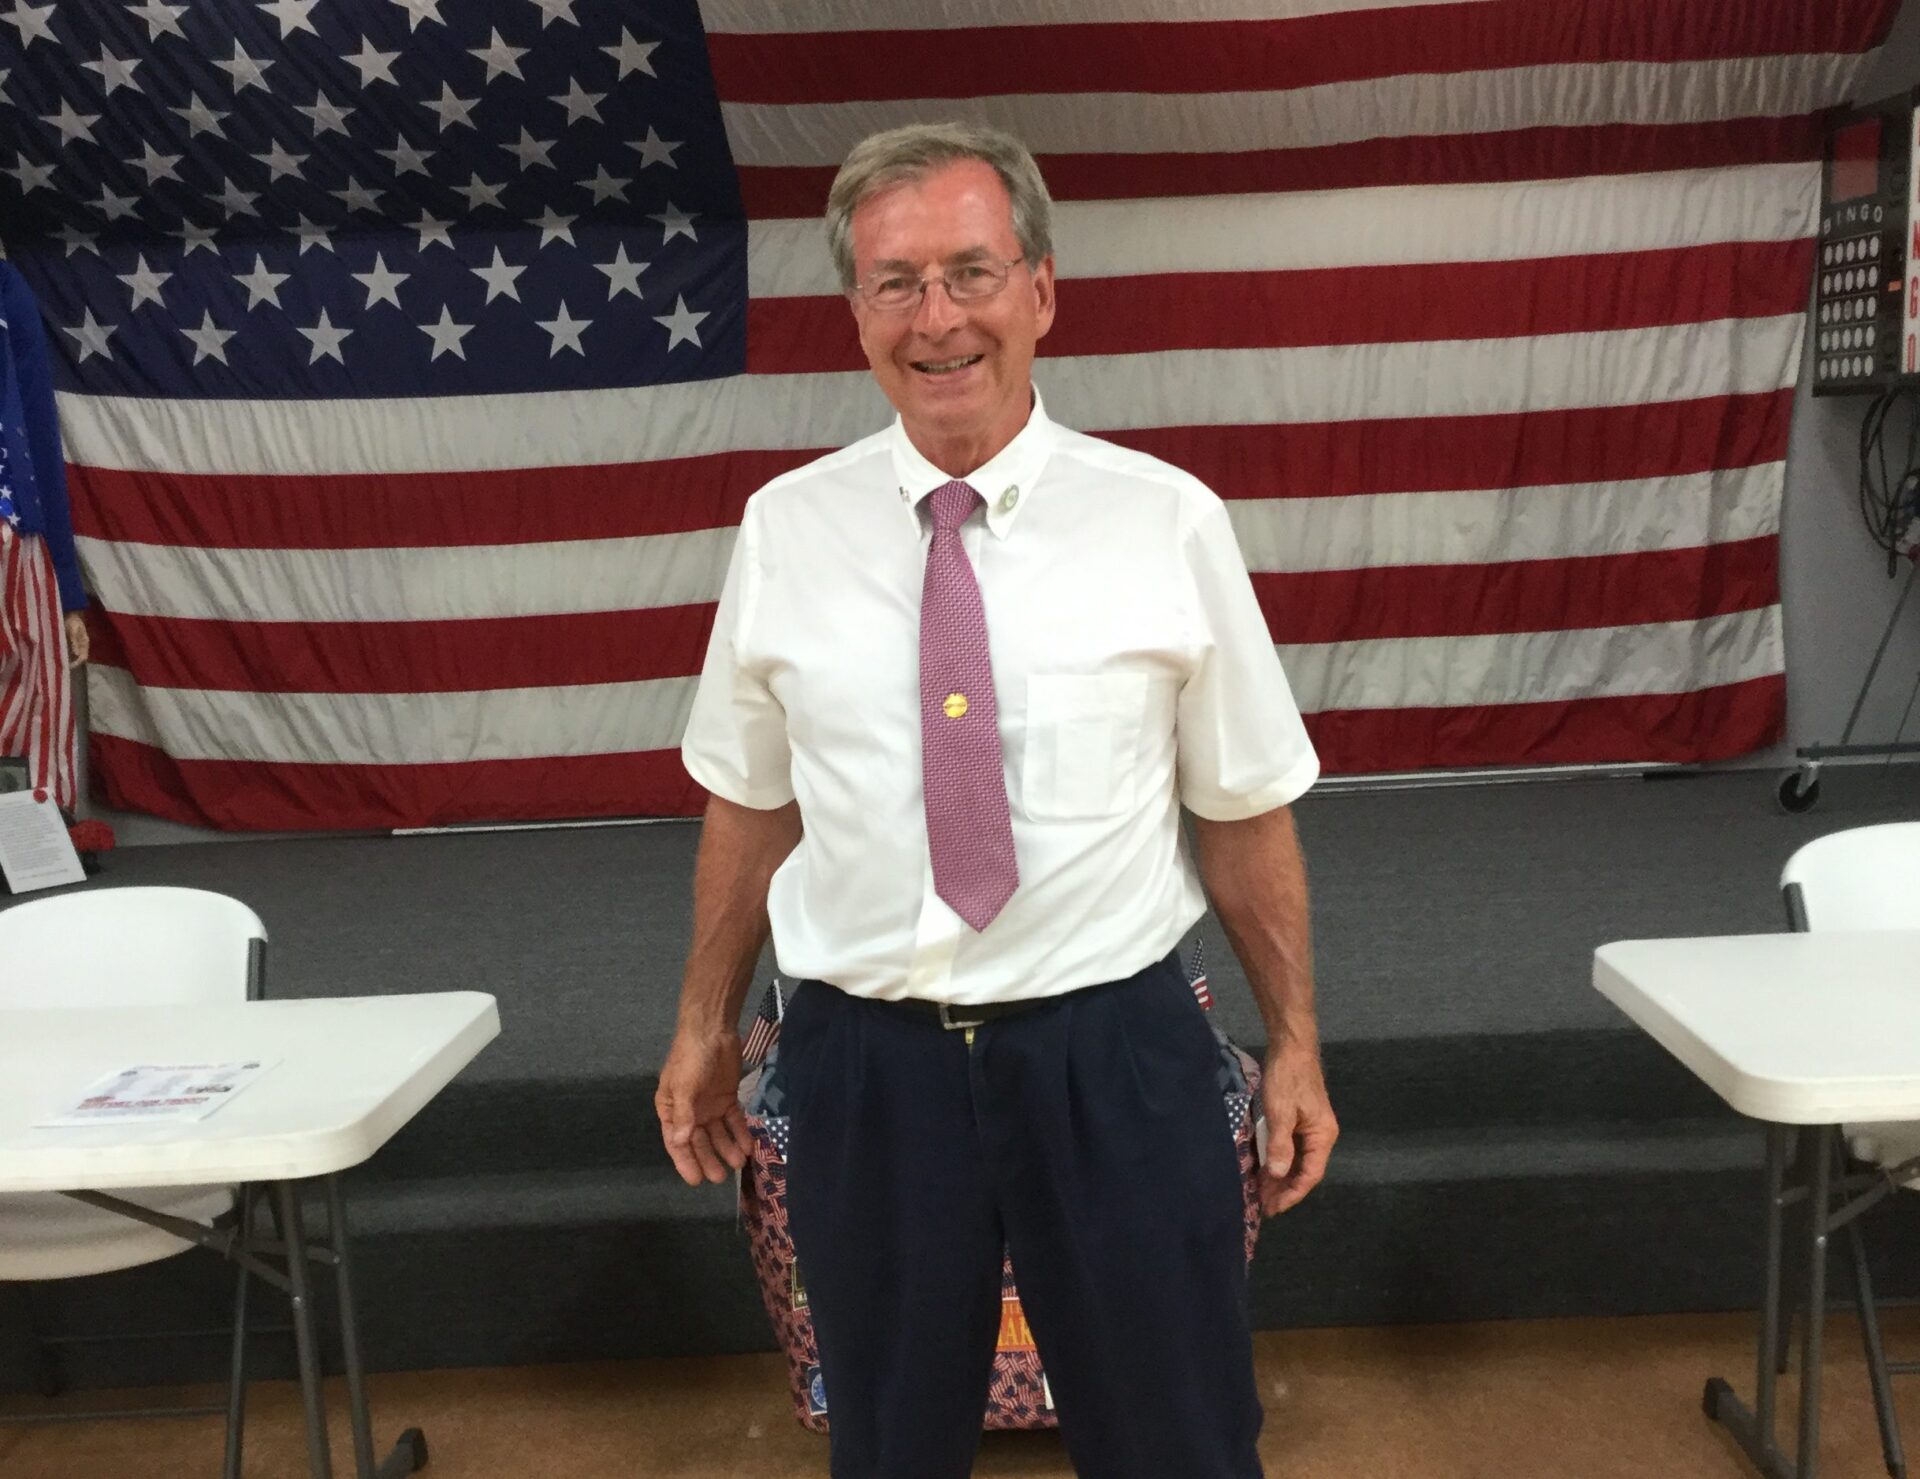 Eugene Kowalski lost the race for Seat 4 on the DeBary City Council to Phyllis Butlien